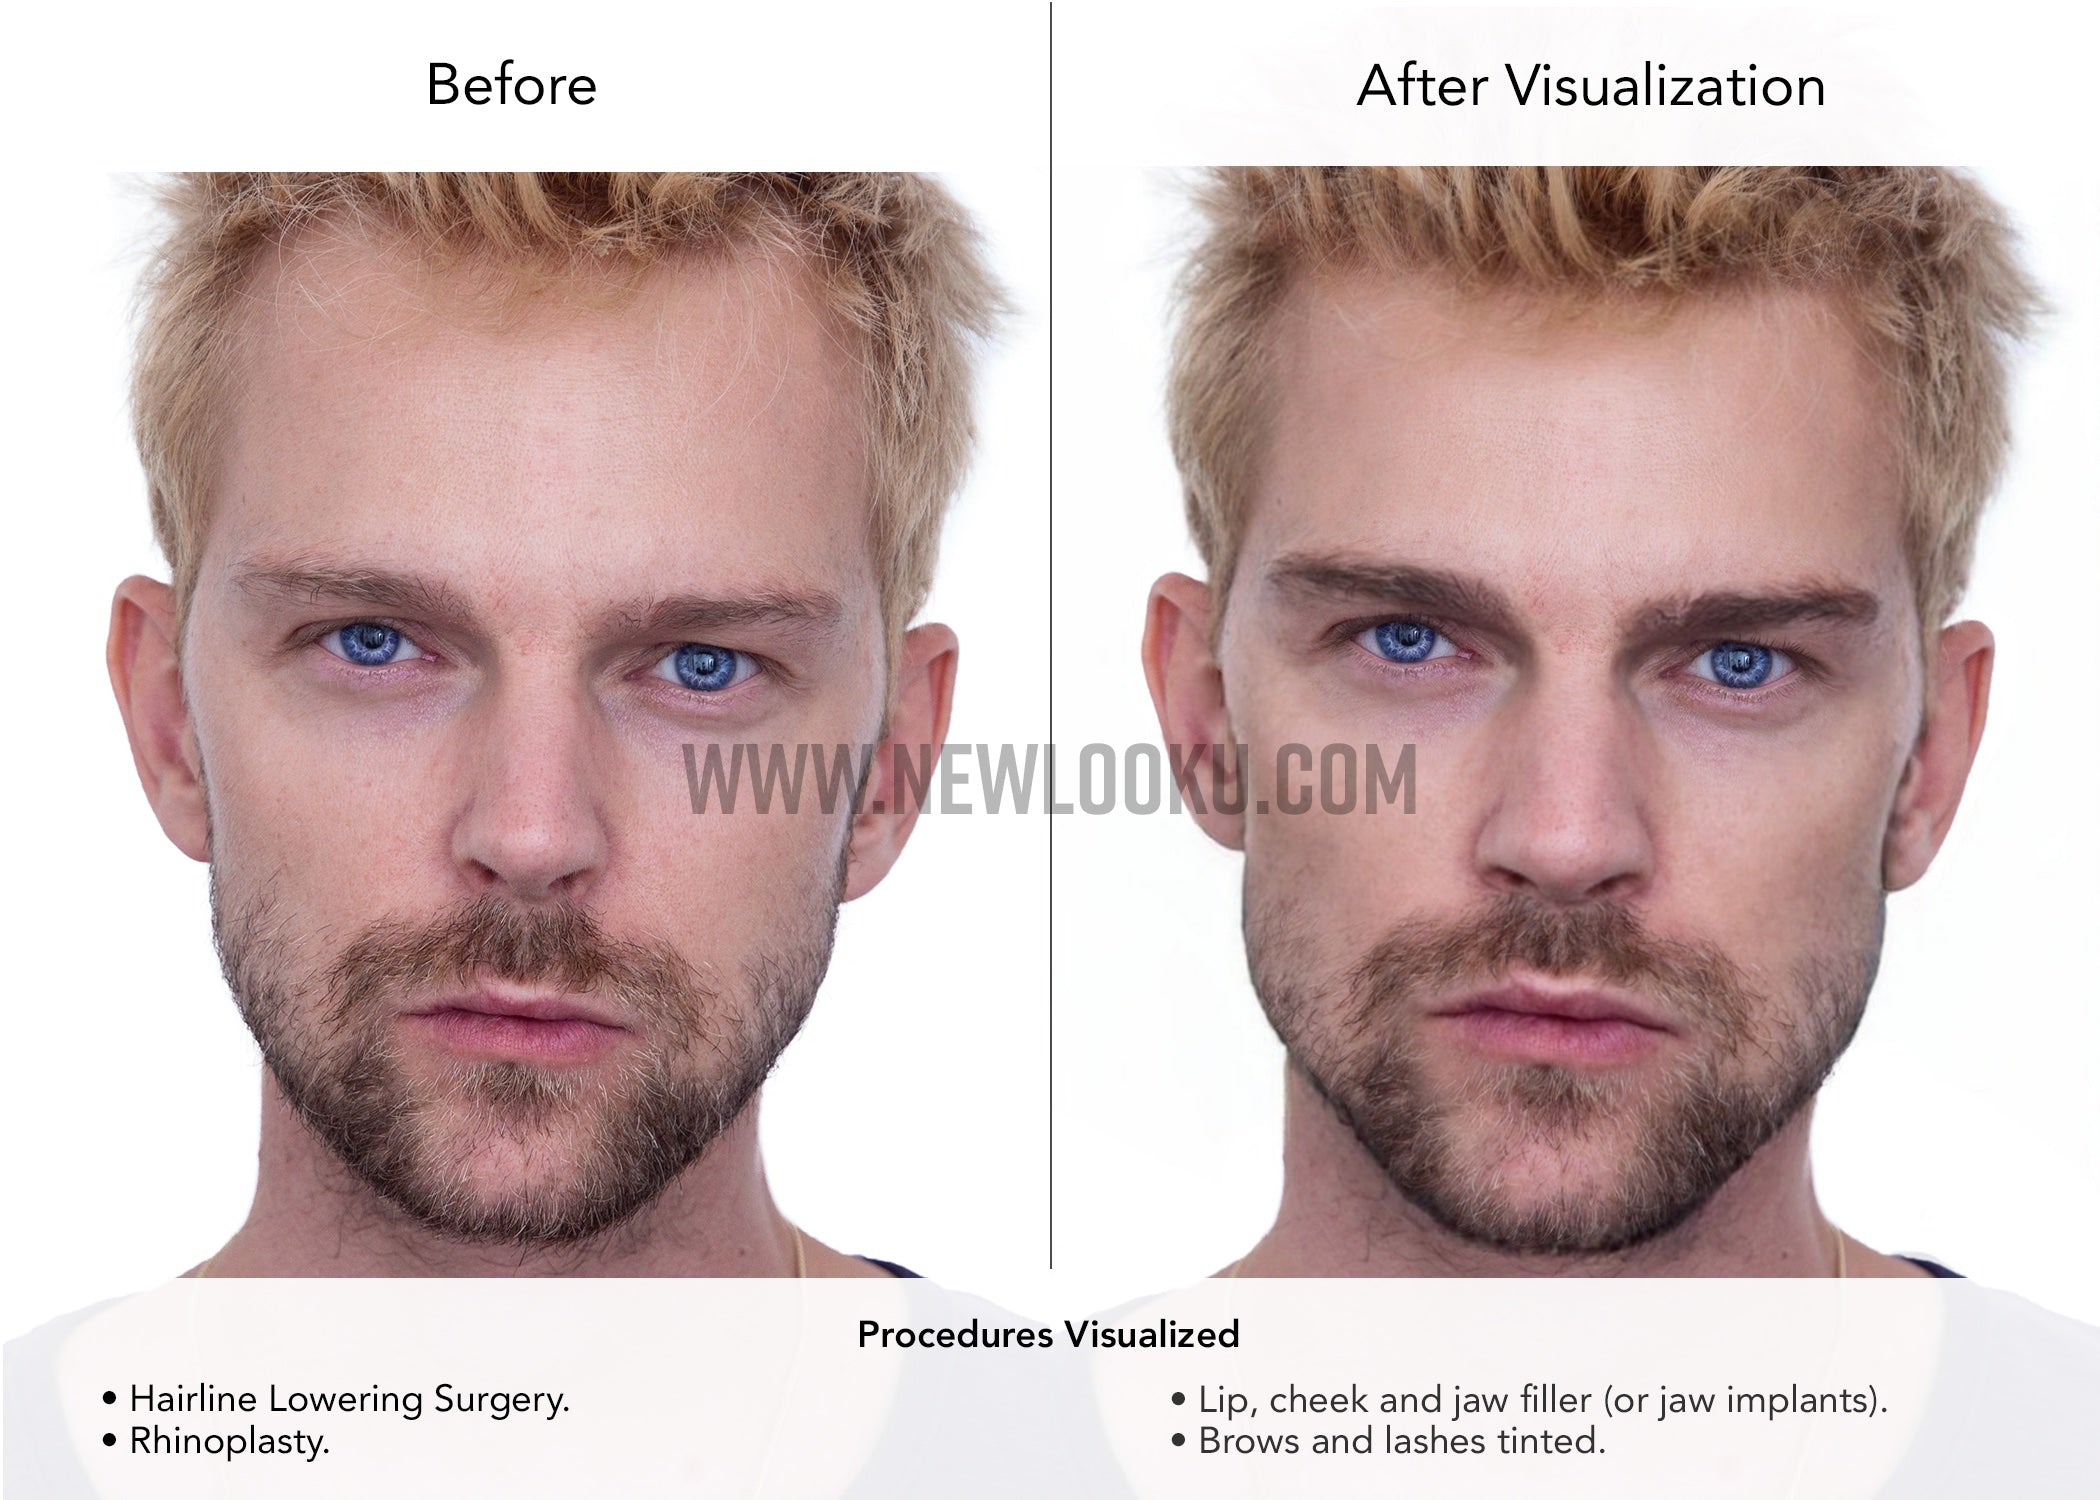 30 year old man Plastic Surgery Simulation Before & After Photo.